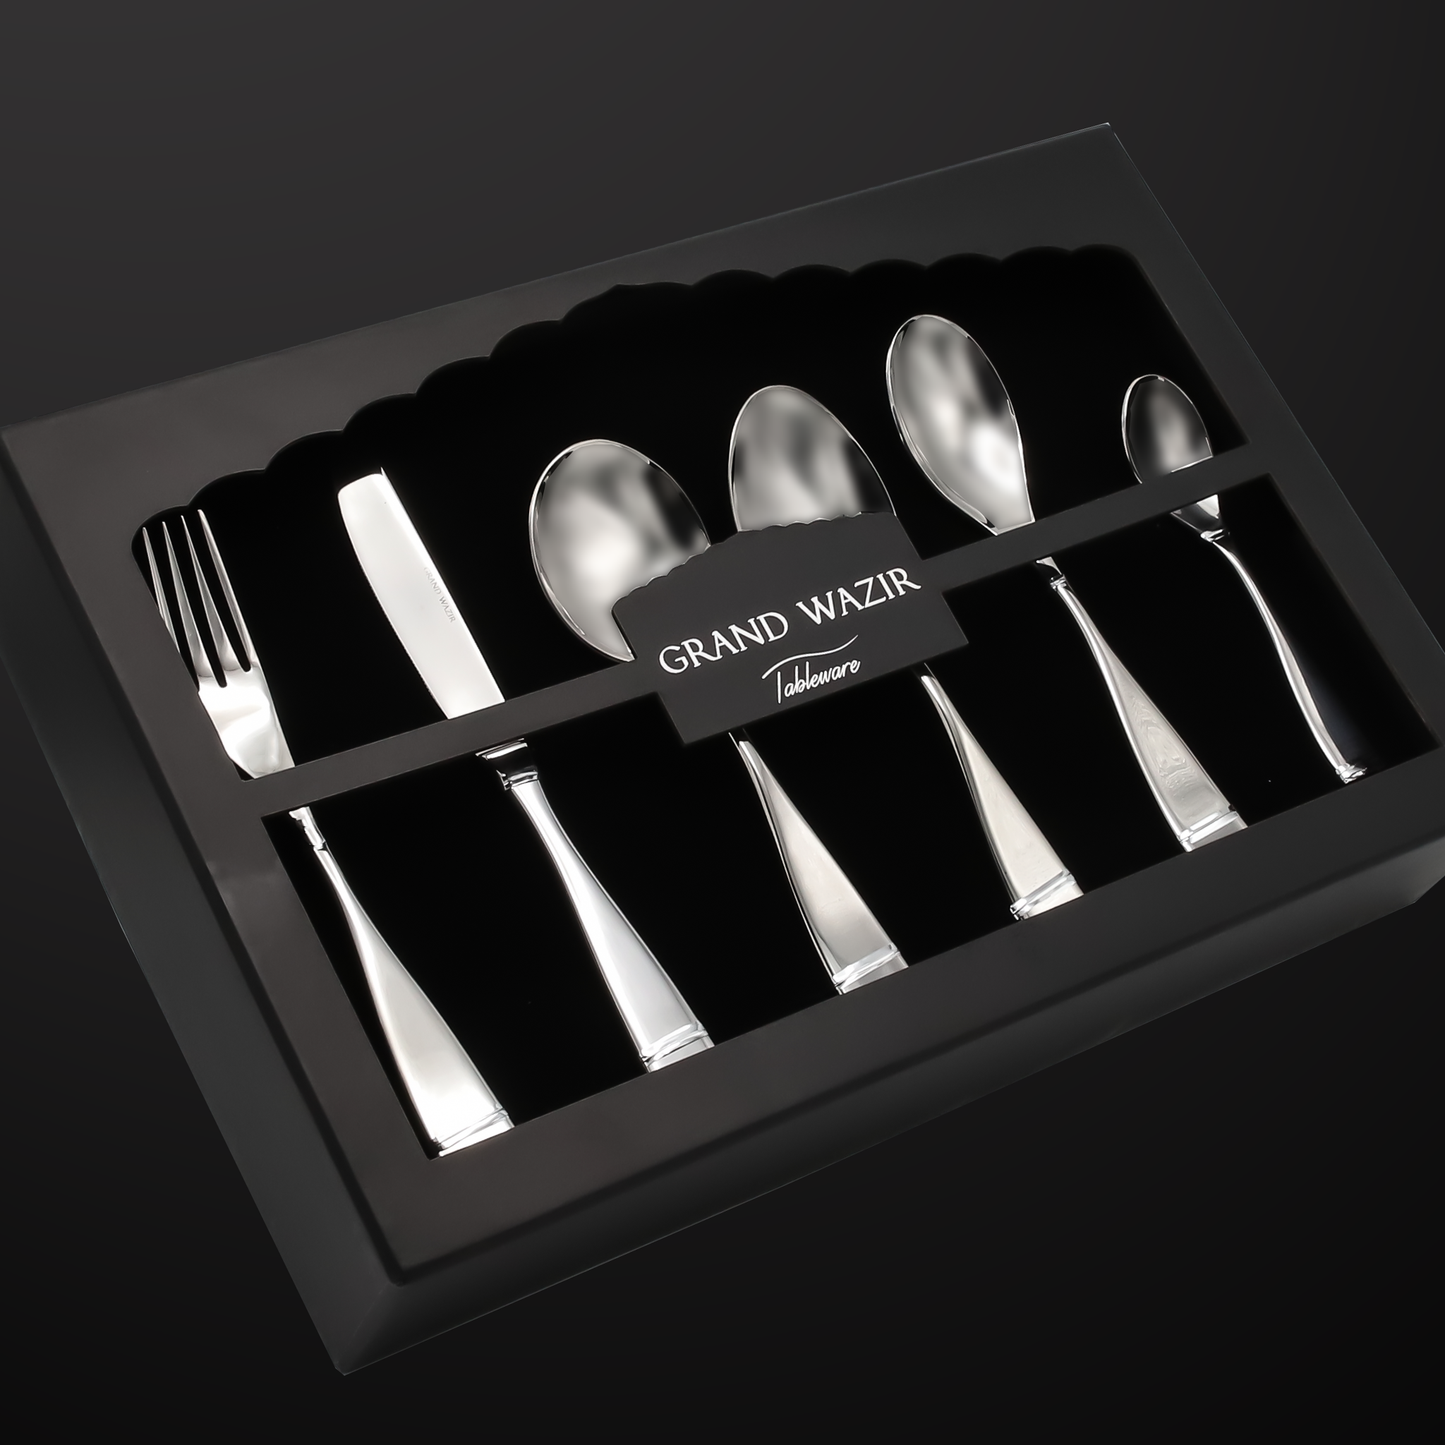 Artisan 4 Gauge Set: A Touch of Luxury at Every Meal